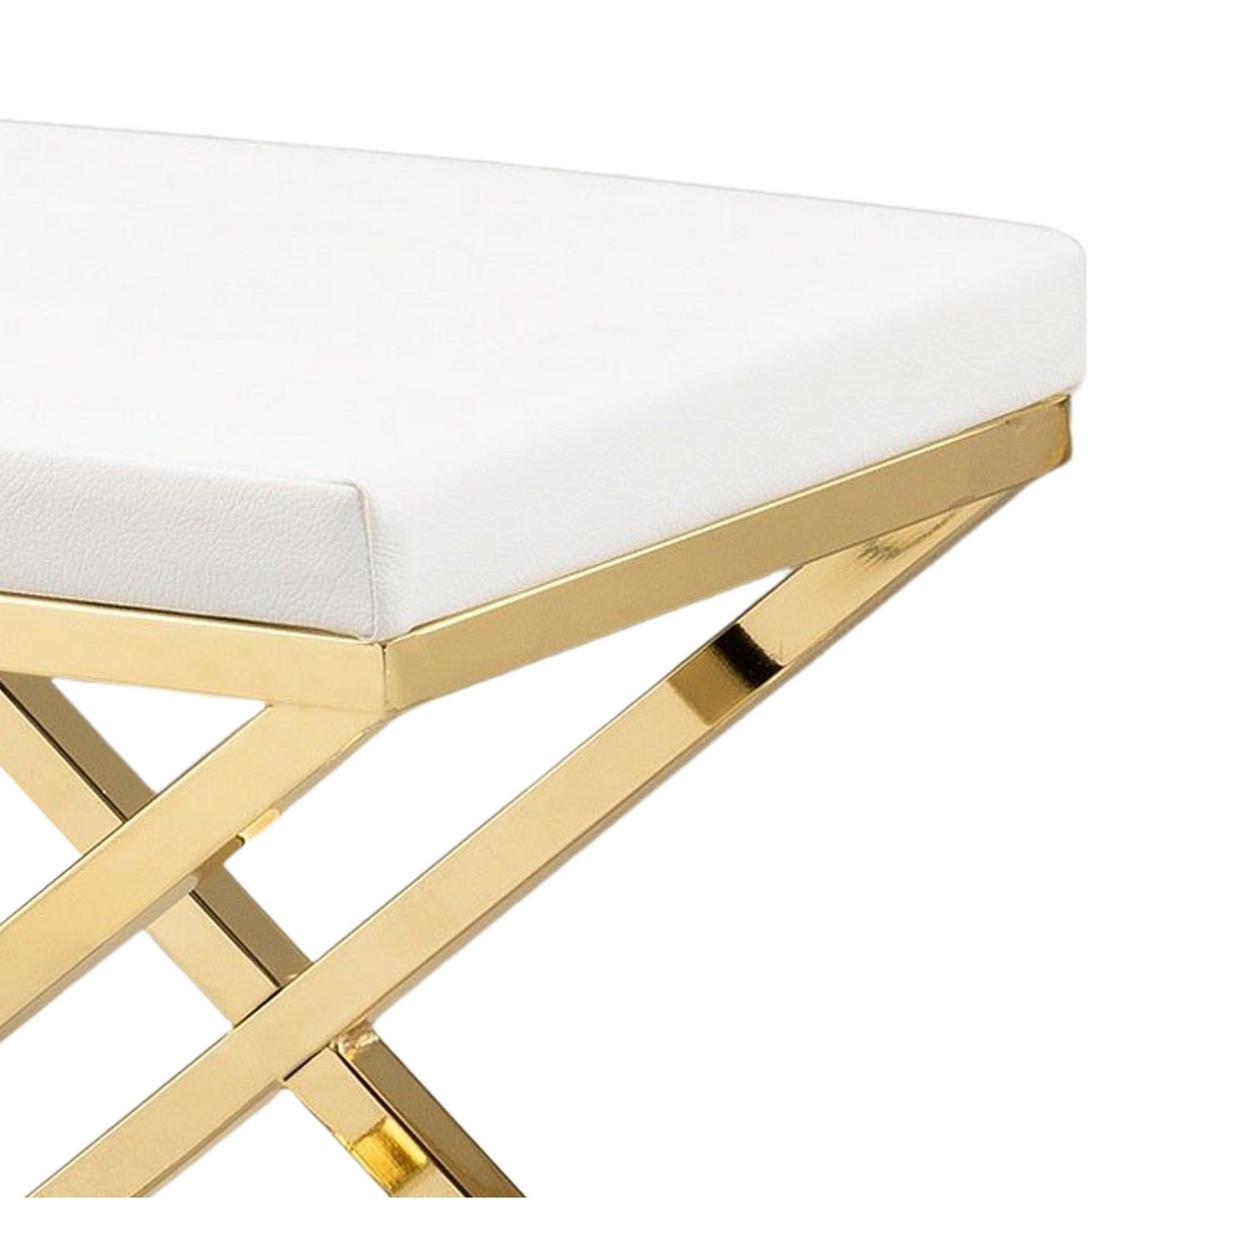 Sumi 18 Inch Stool, Padded Seat, White Faux Leather, Crossed Gold Legs - Saltoro Sherpi